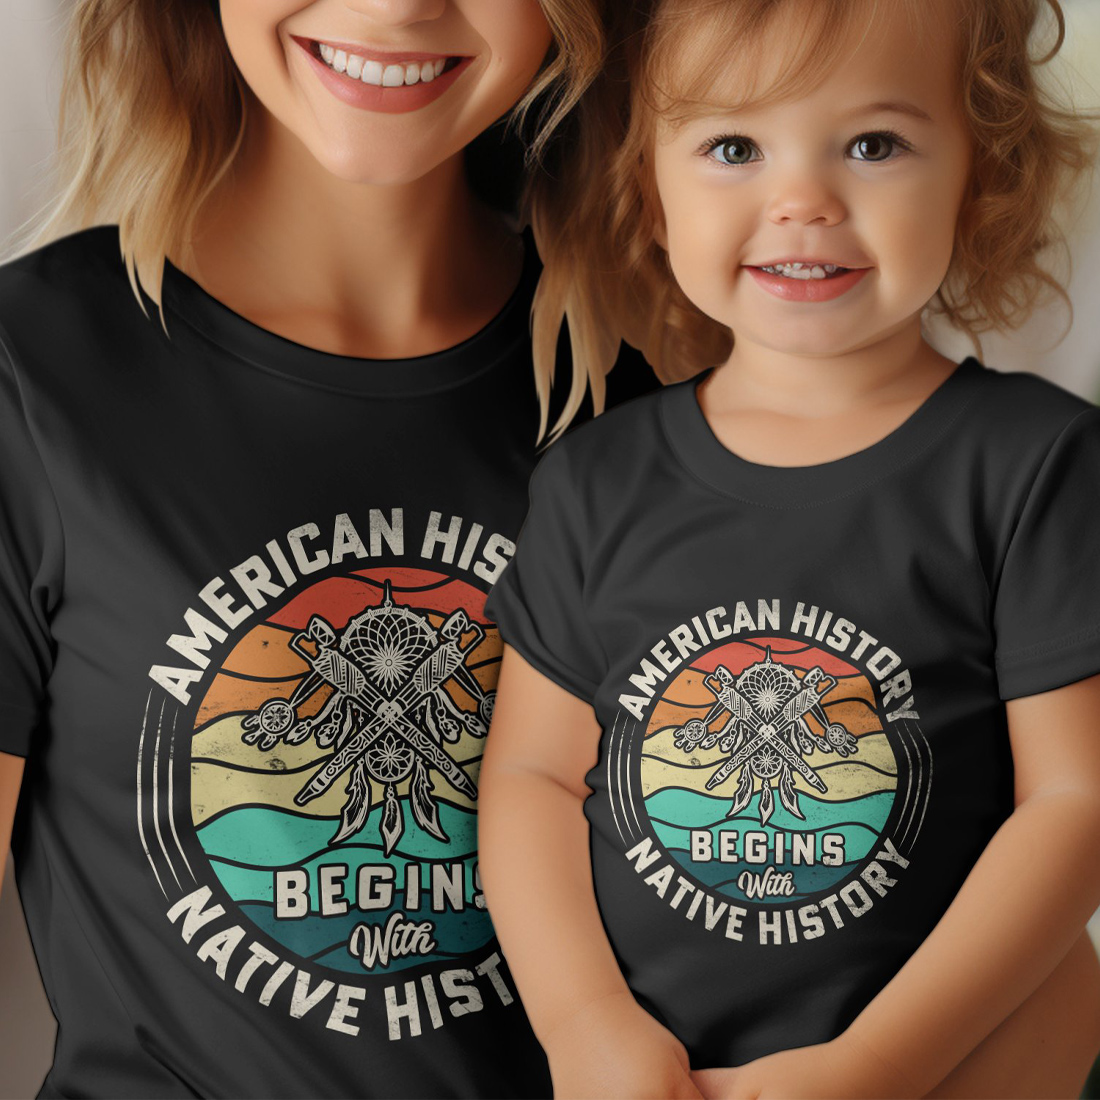 American History Begins with Native History, Native American T-Shirts, Native American Pride Shirts cover image.